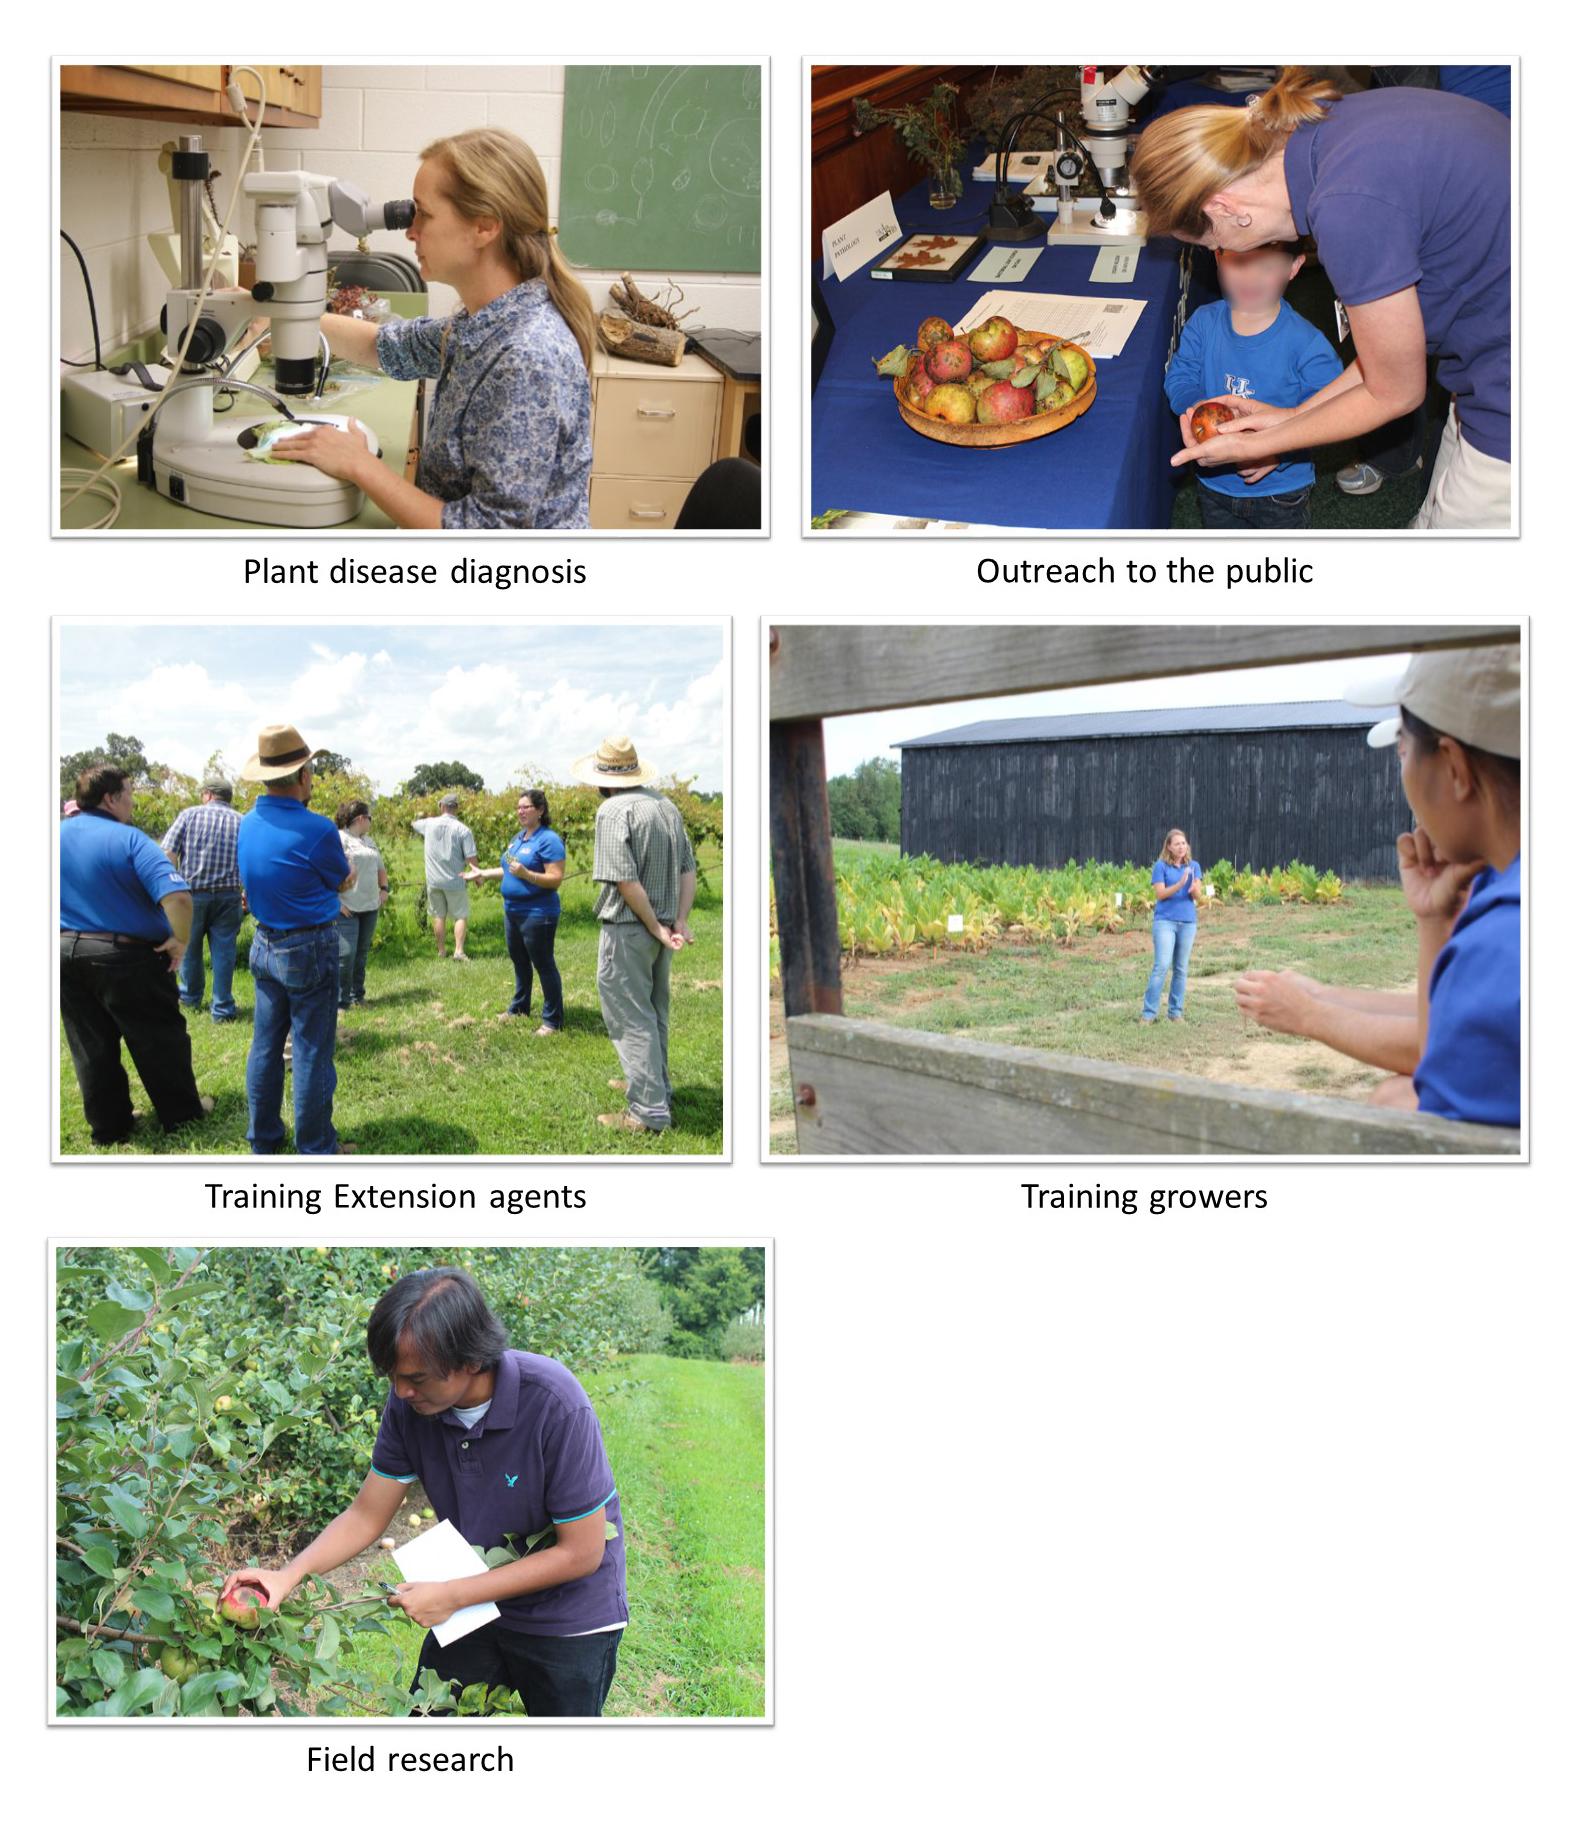 Extension: Plant disease diagnosis, outreach to the public, training extension agents, training growers, field research